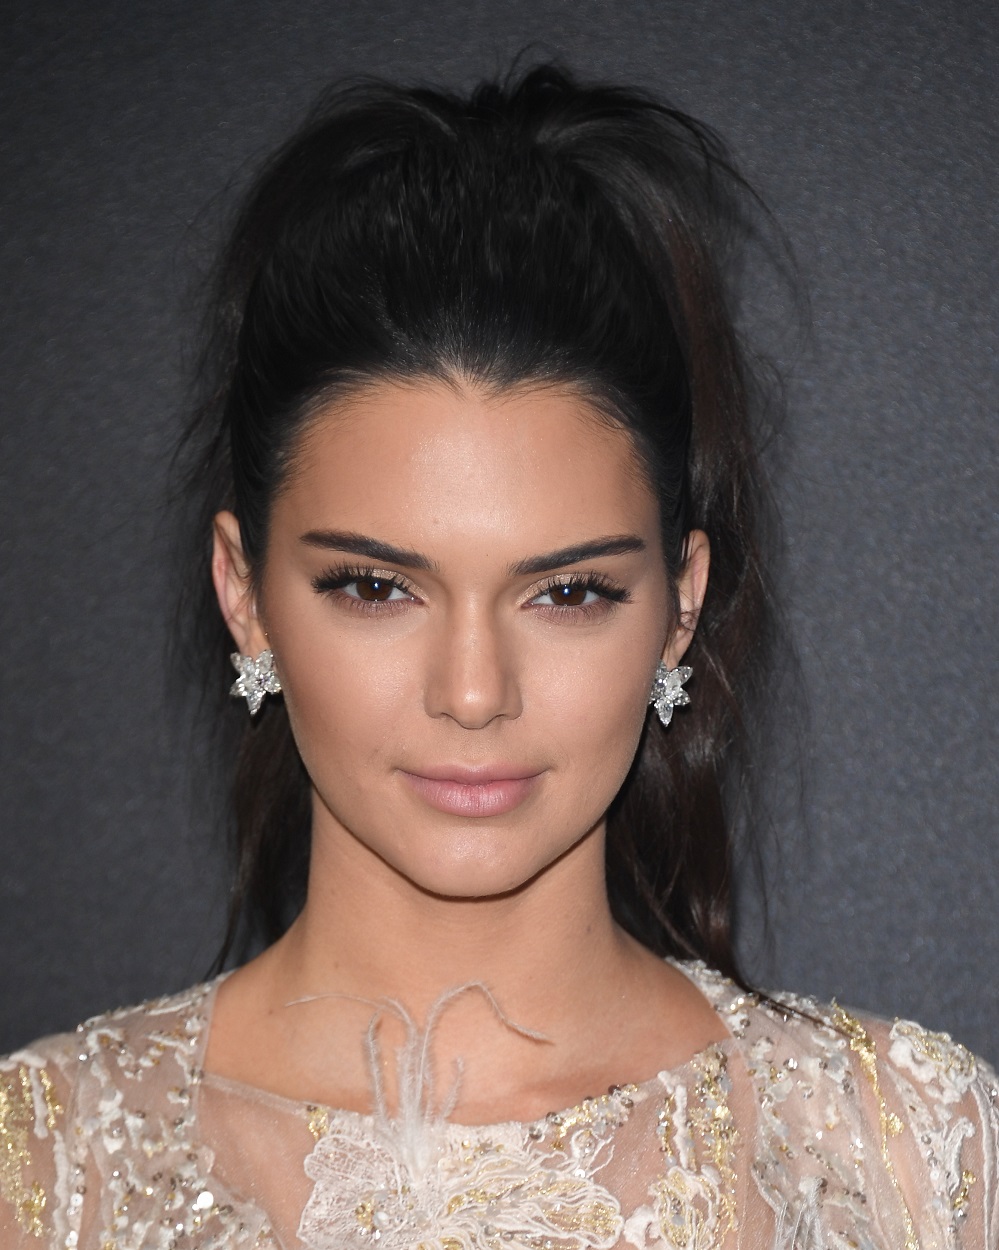 Kendall Jenner at the Chopard Wild Party - The 69th Annual Cannes Film Festival